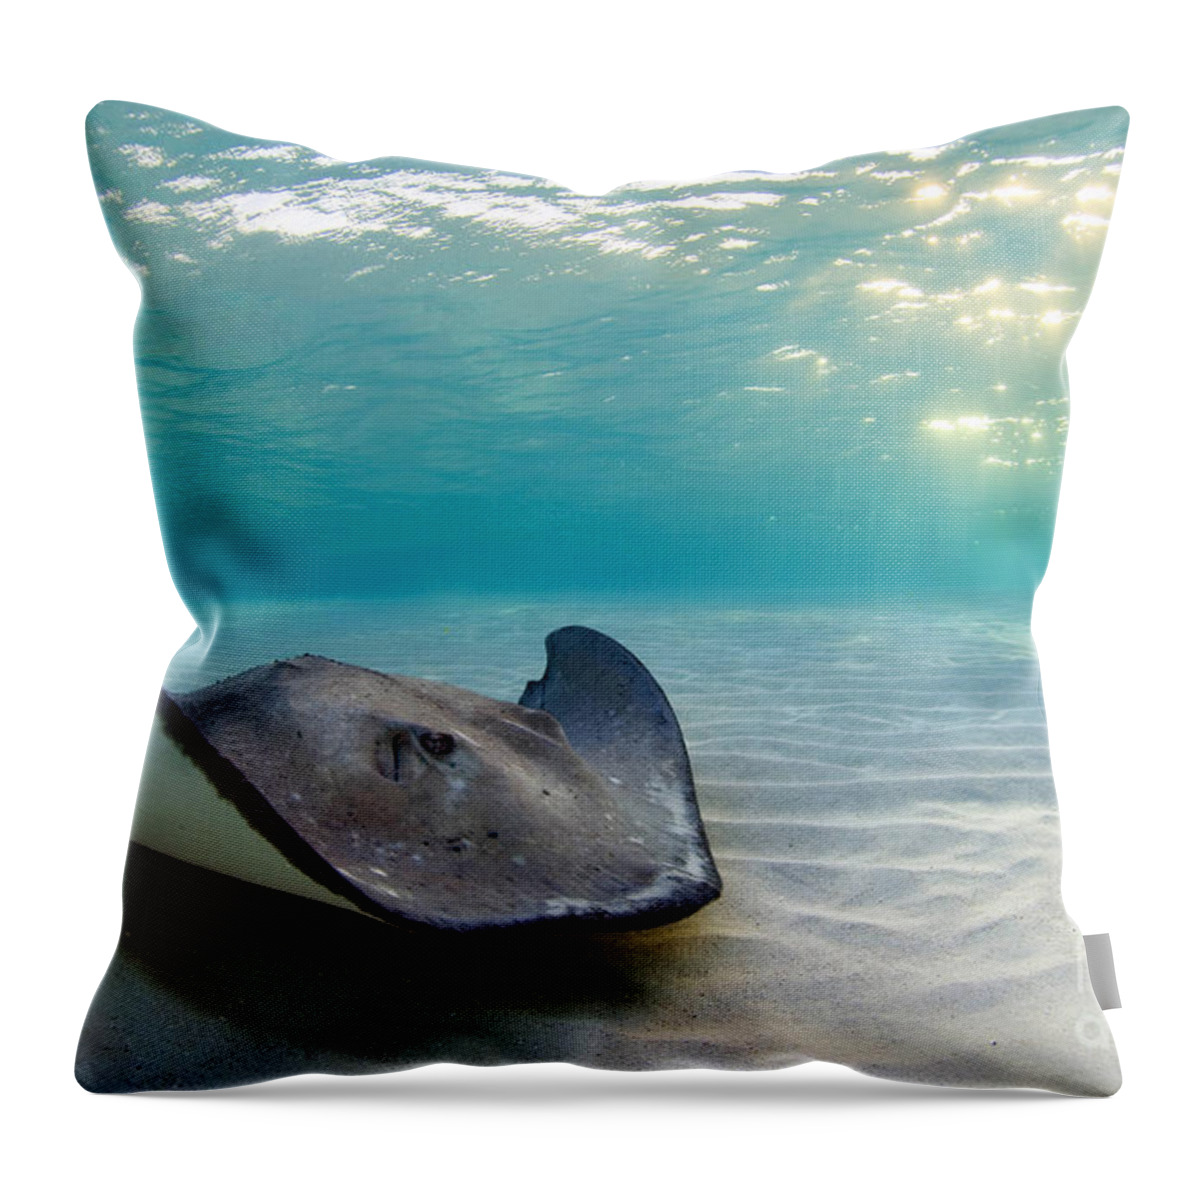 Stingray Throw Pillow featuring the photograph A Southern Stingray by Alex Mustard